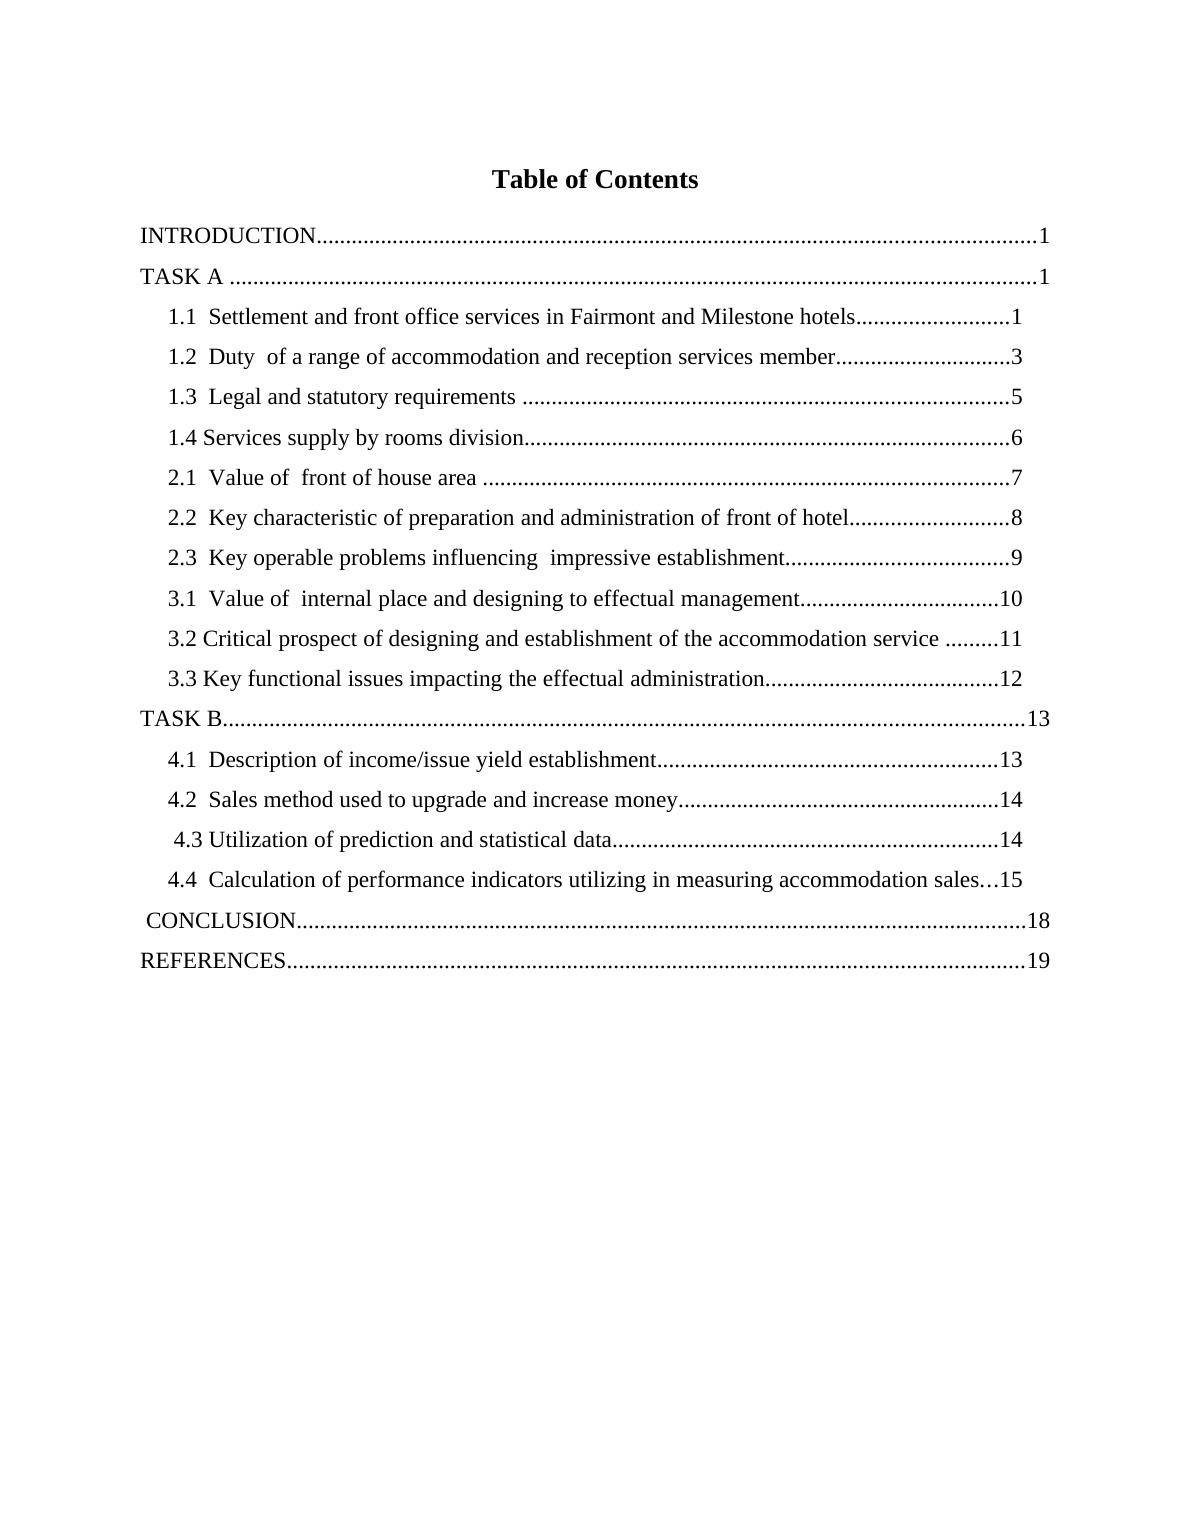 Room Division Operations Management Report_2